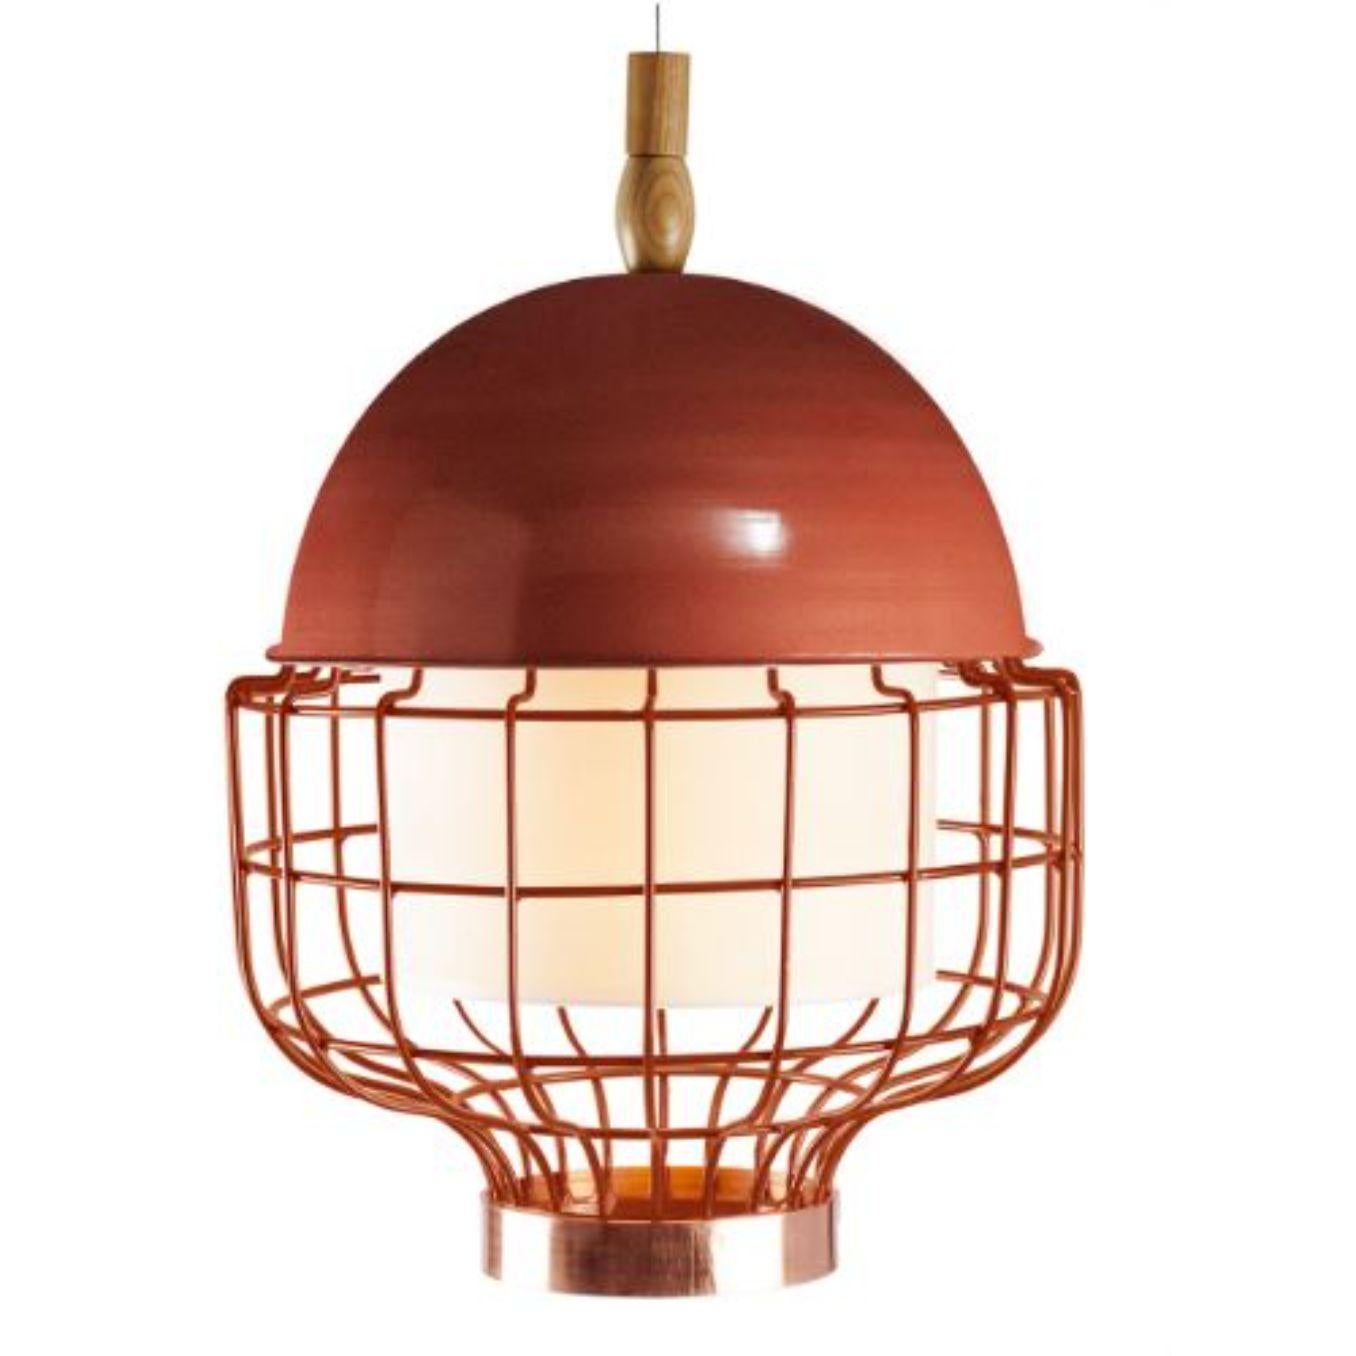 Copper Magnolia III Suspension Lamp with Copper Ring by Dooq For Sale 2